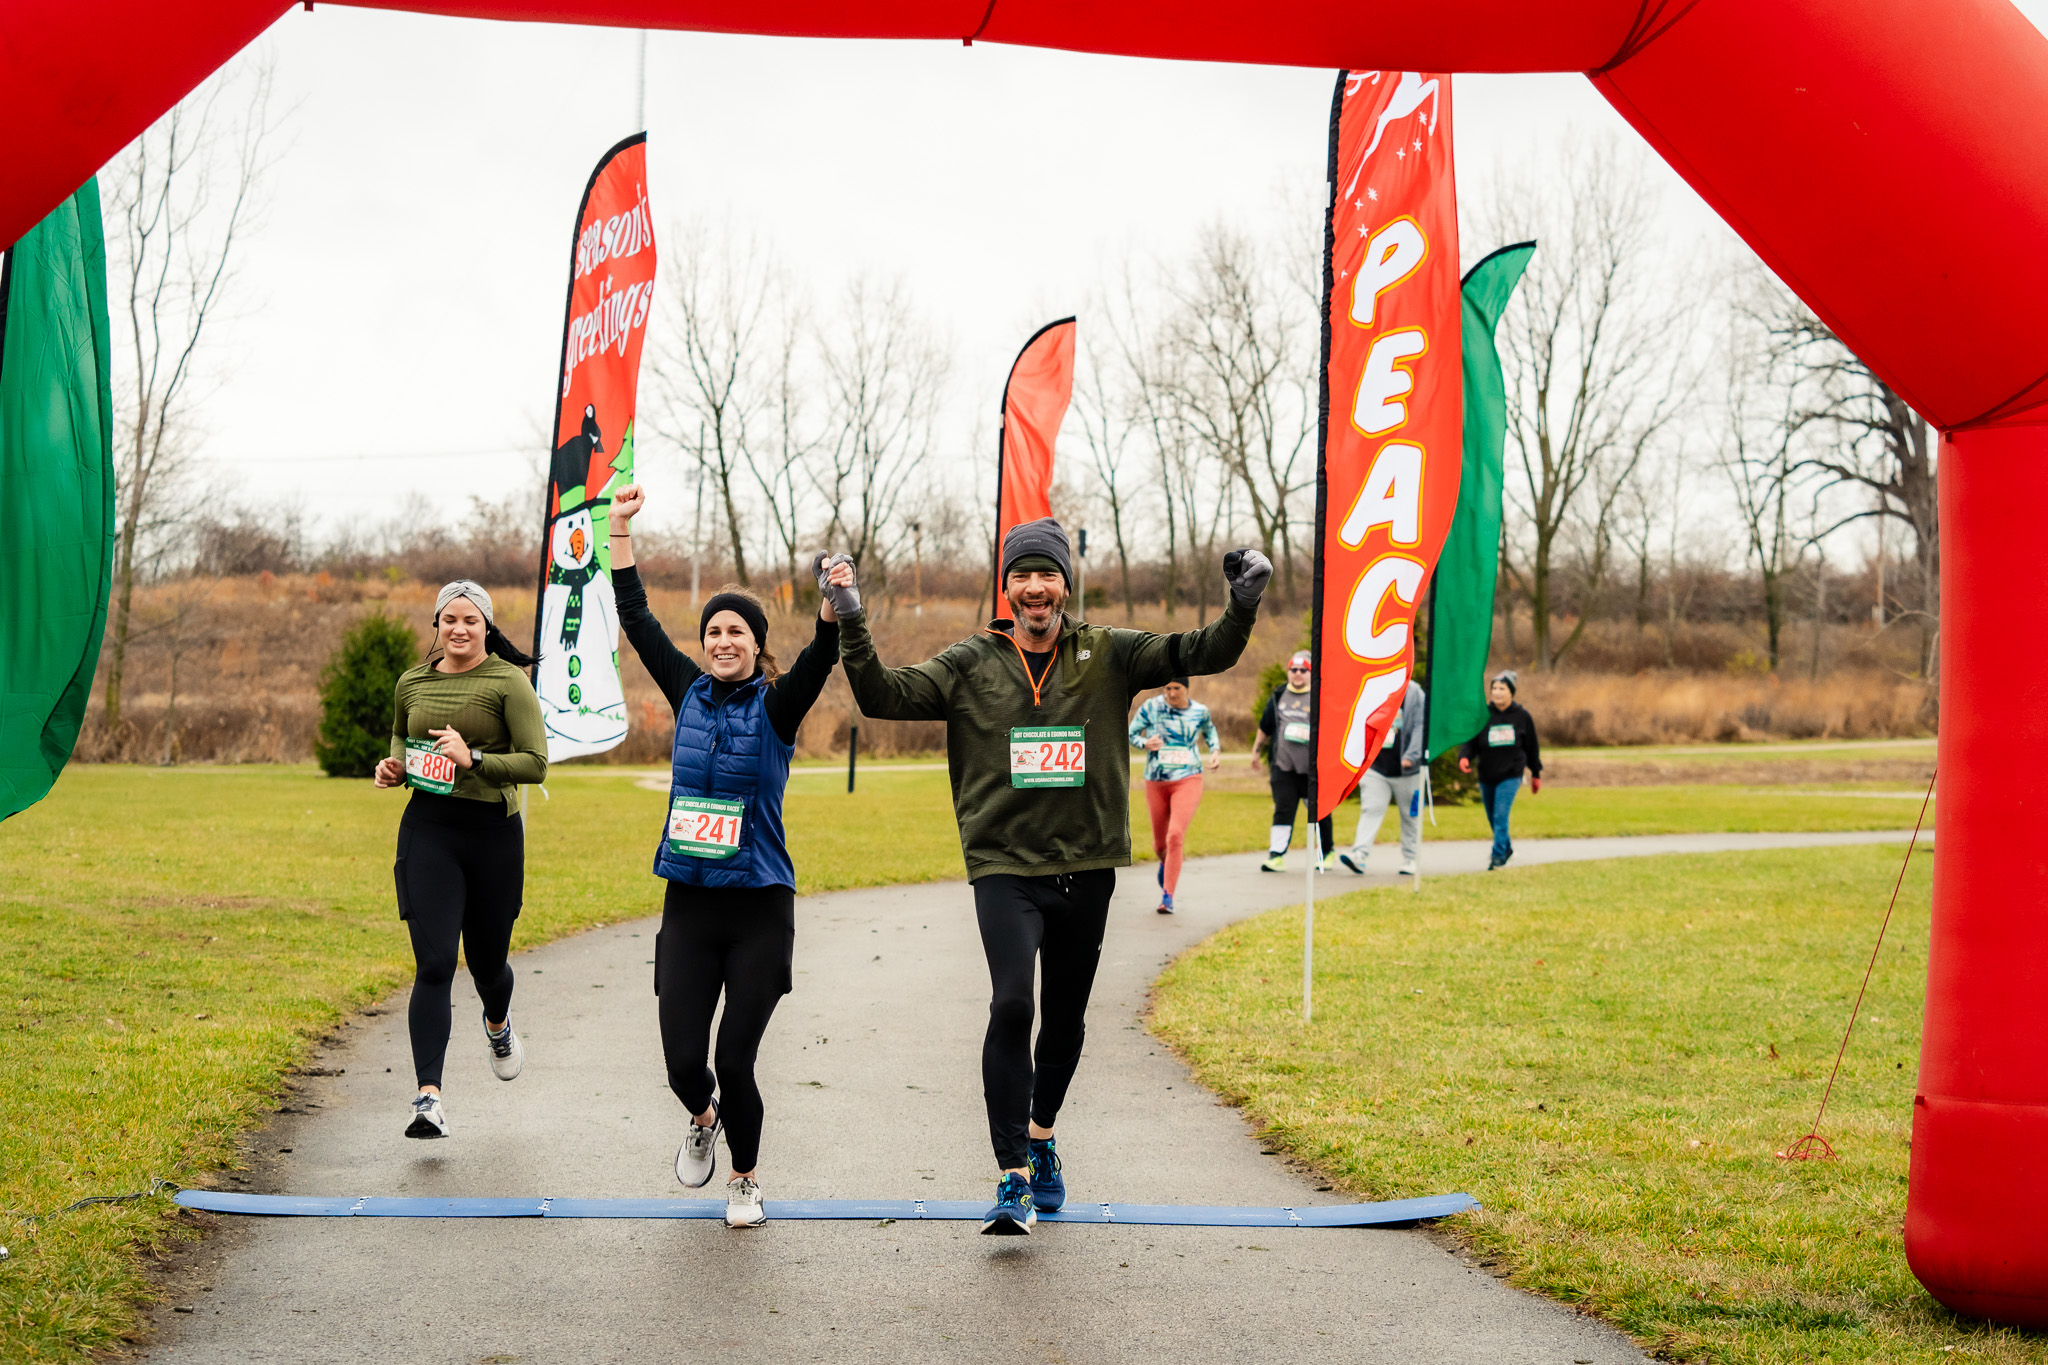 Happy 5k and 10k Race Finishers Crossing The Finish Line - Hot Chocolate and Eggnog 1mi, 5k, 10k & Kids Dash - USA Race Timing and Event Management - Hot Chocolate 5k - Columbus Hot Chocolate Race - Amazing Swag - Great Finishers Medal - Mini Pies